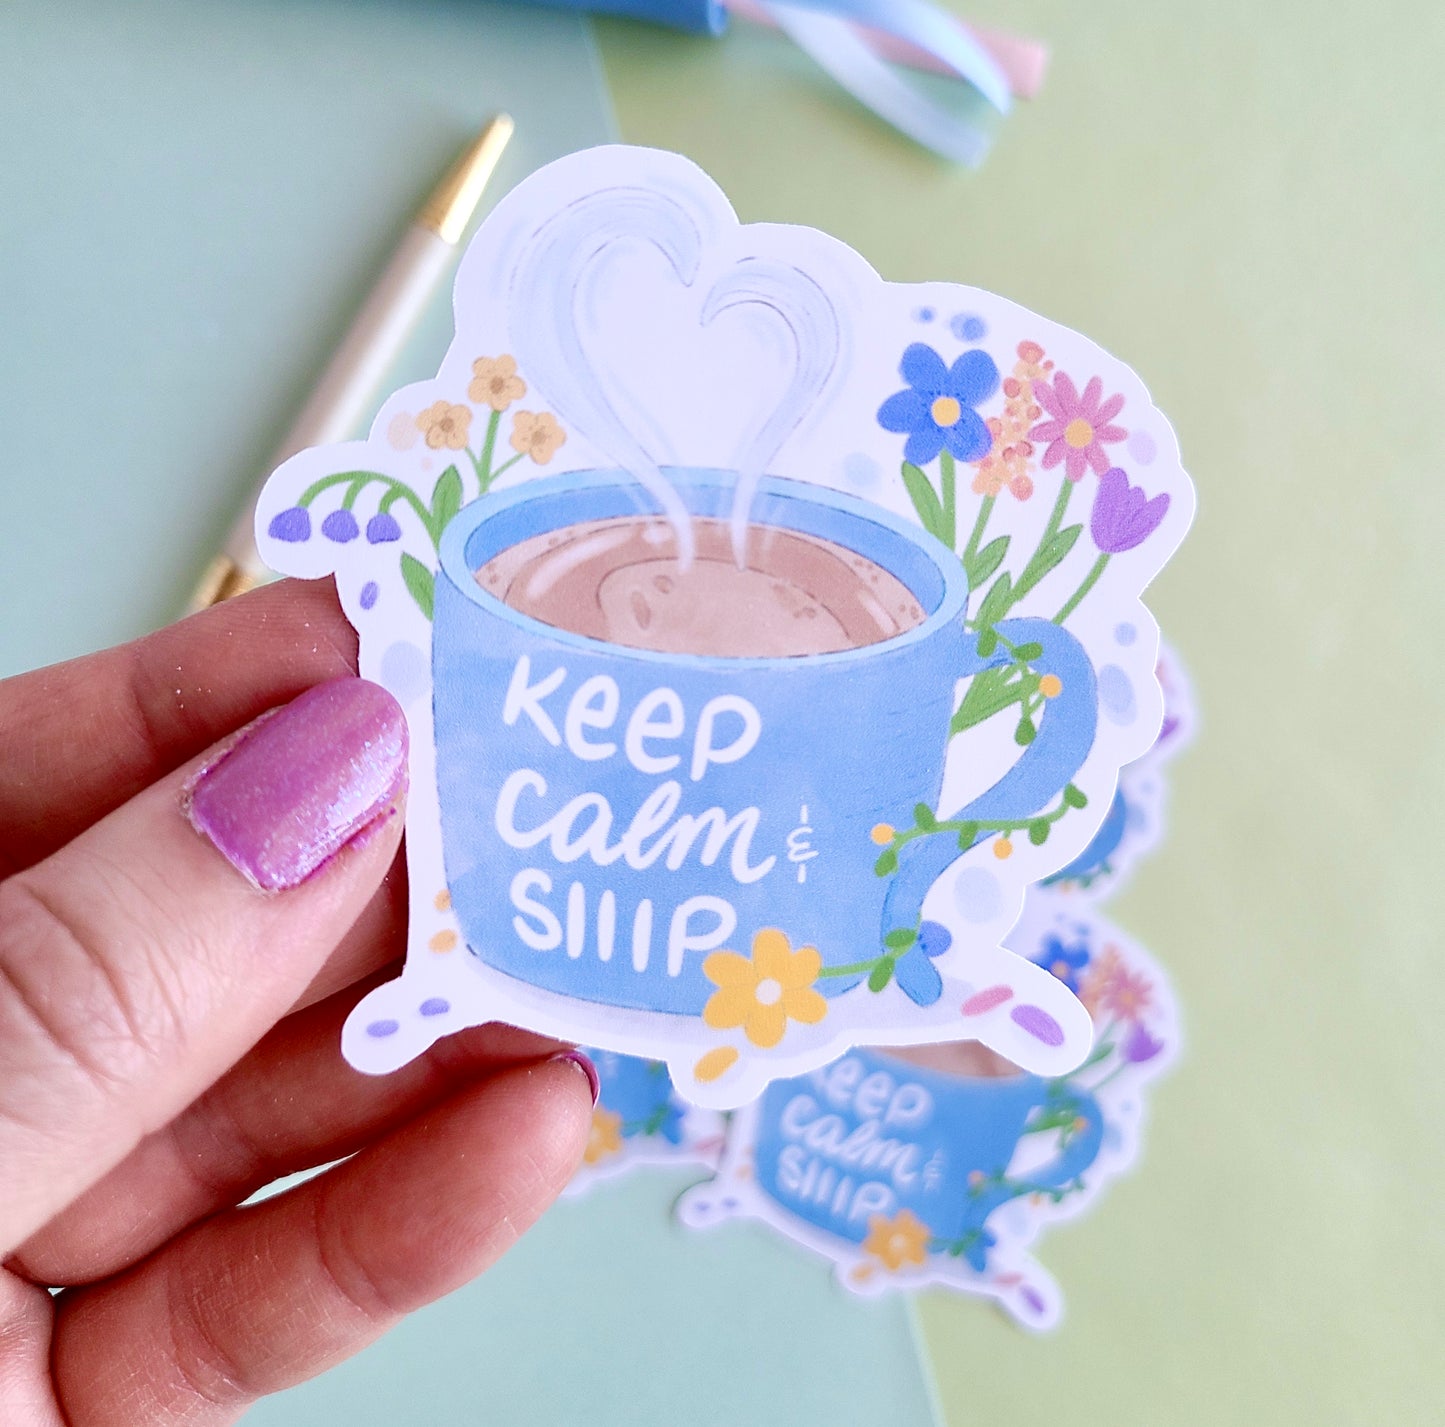 Keep Calm and Siip - Sticker